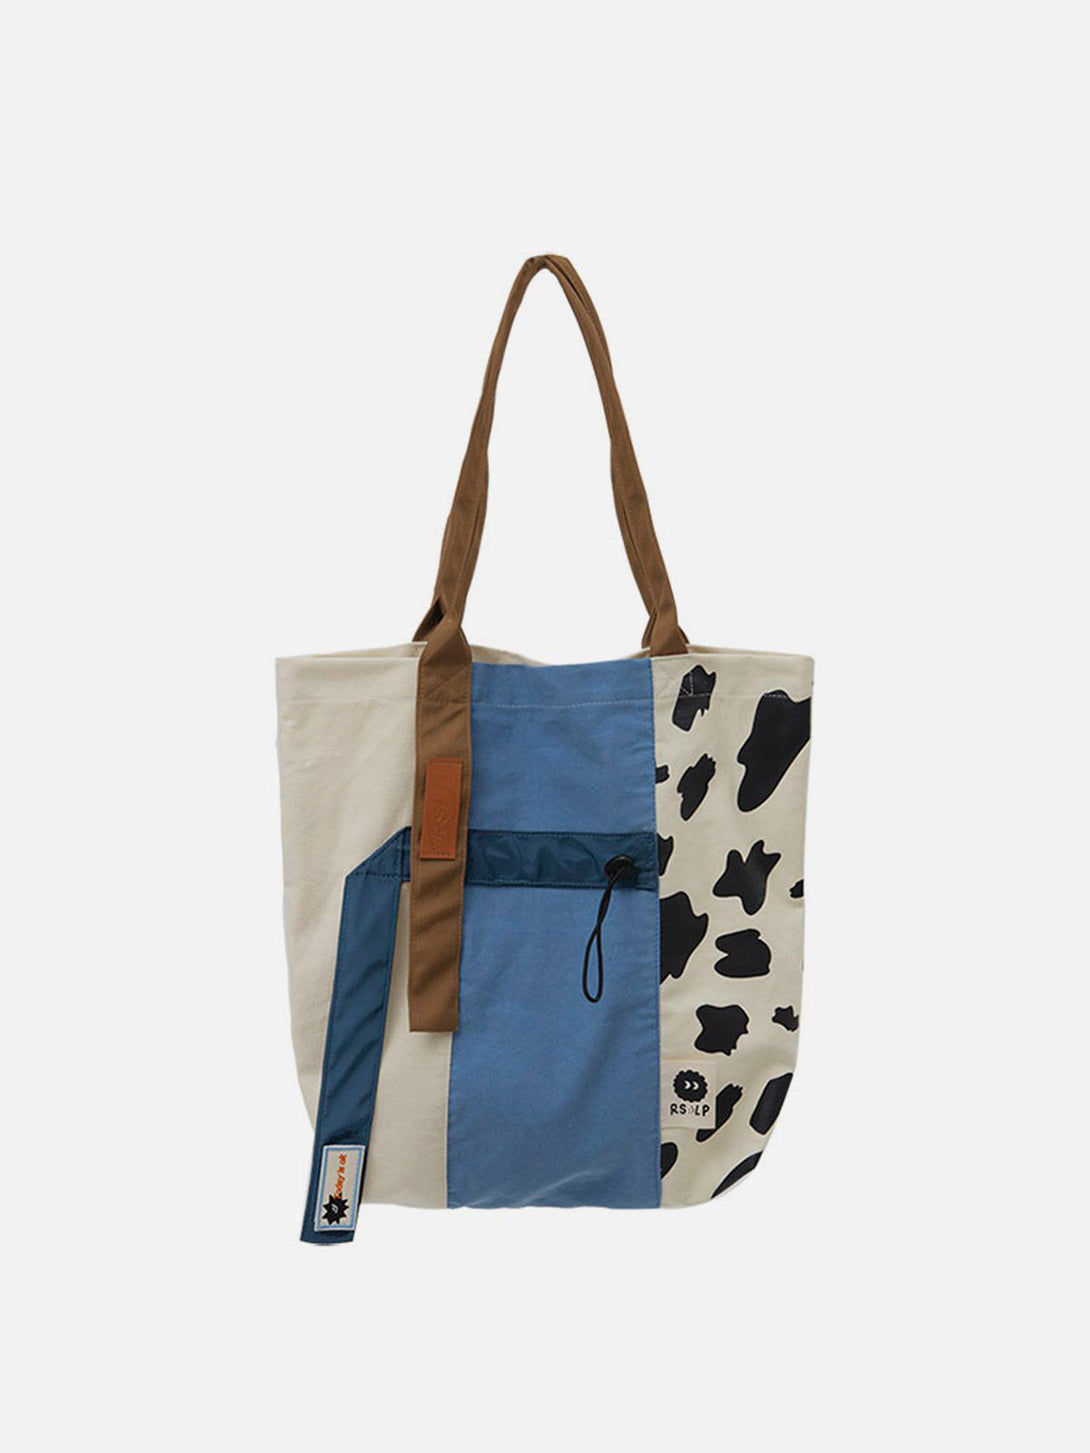 Levefly - Patchwork Cow Pattern Tote Bag - Streetwear Fashion - levefly.com